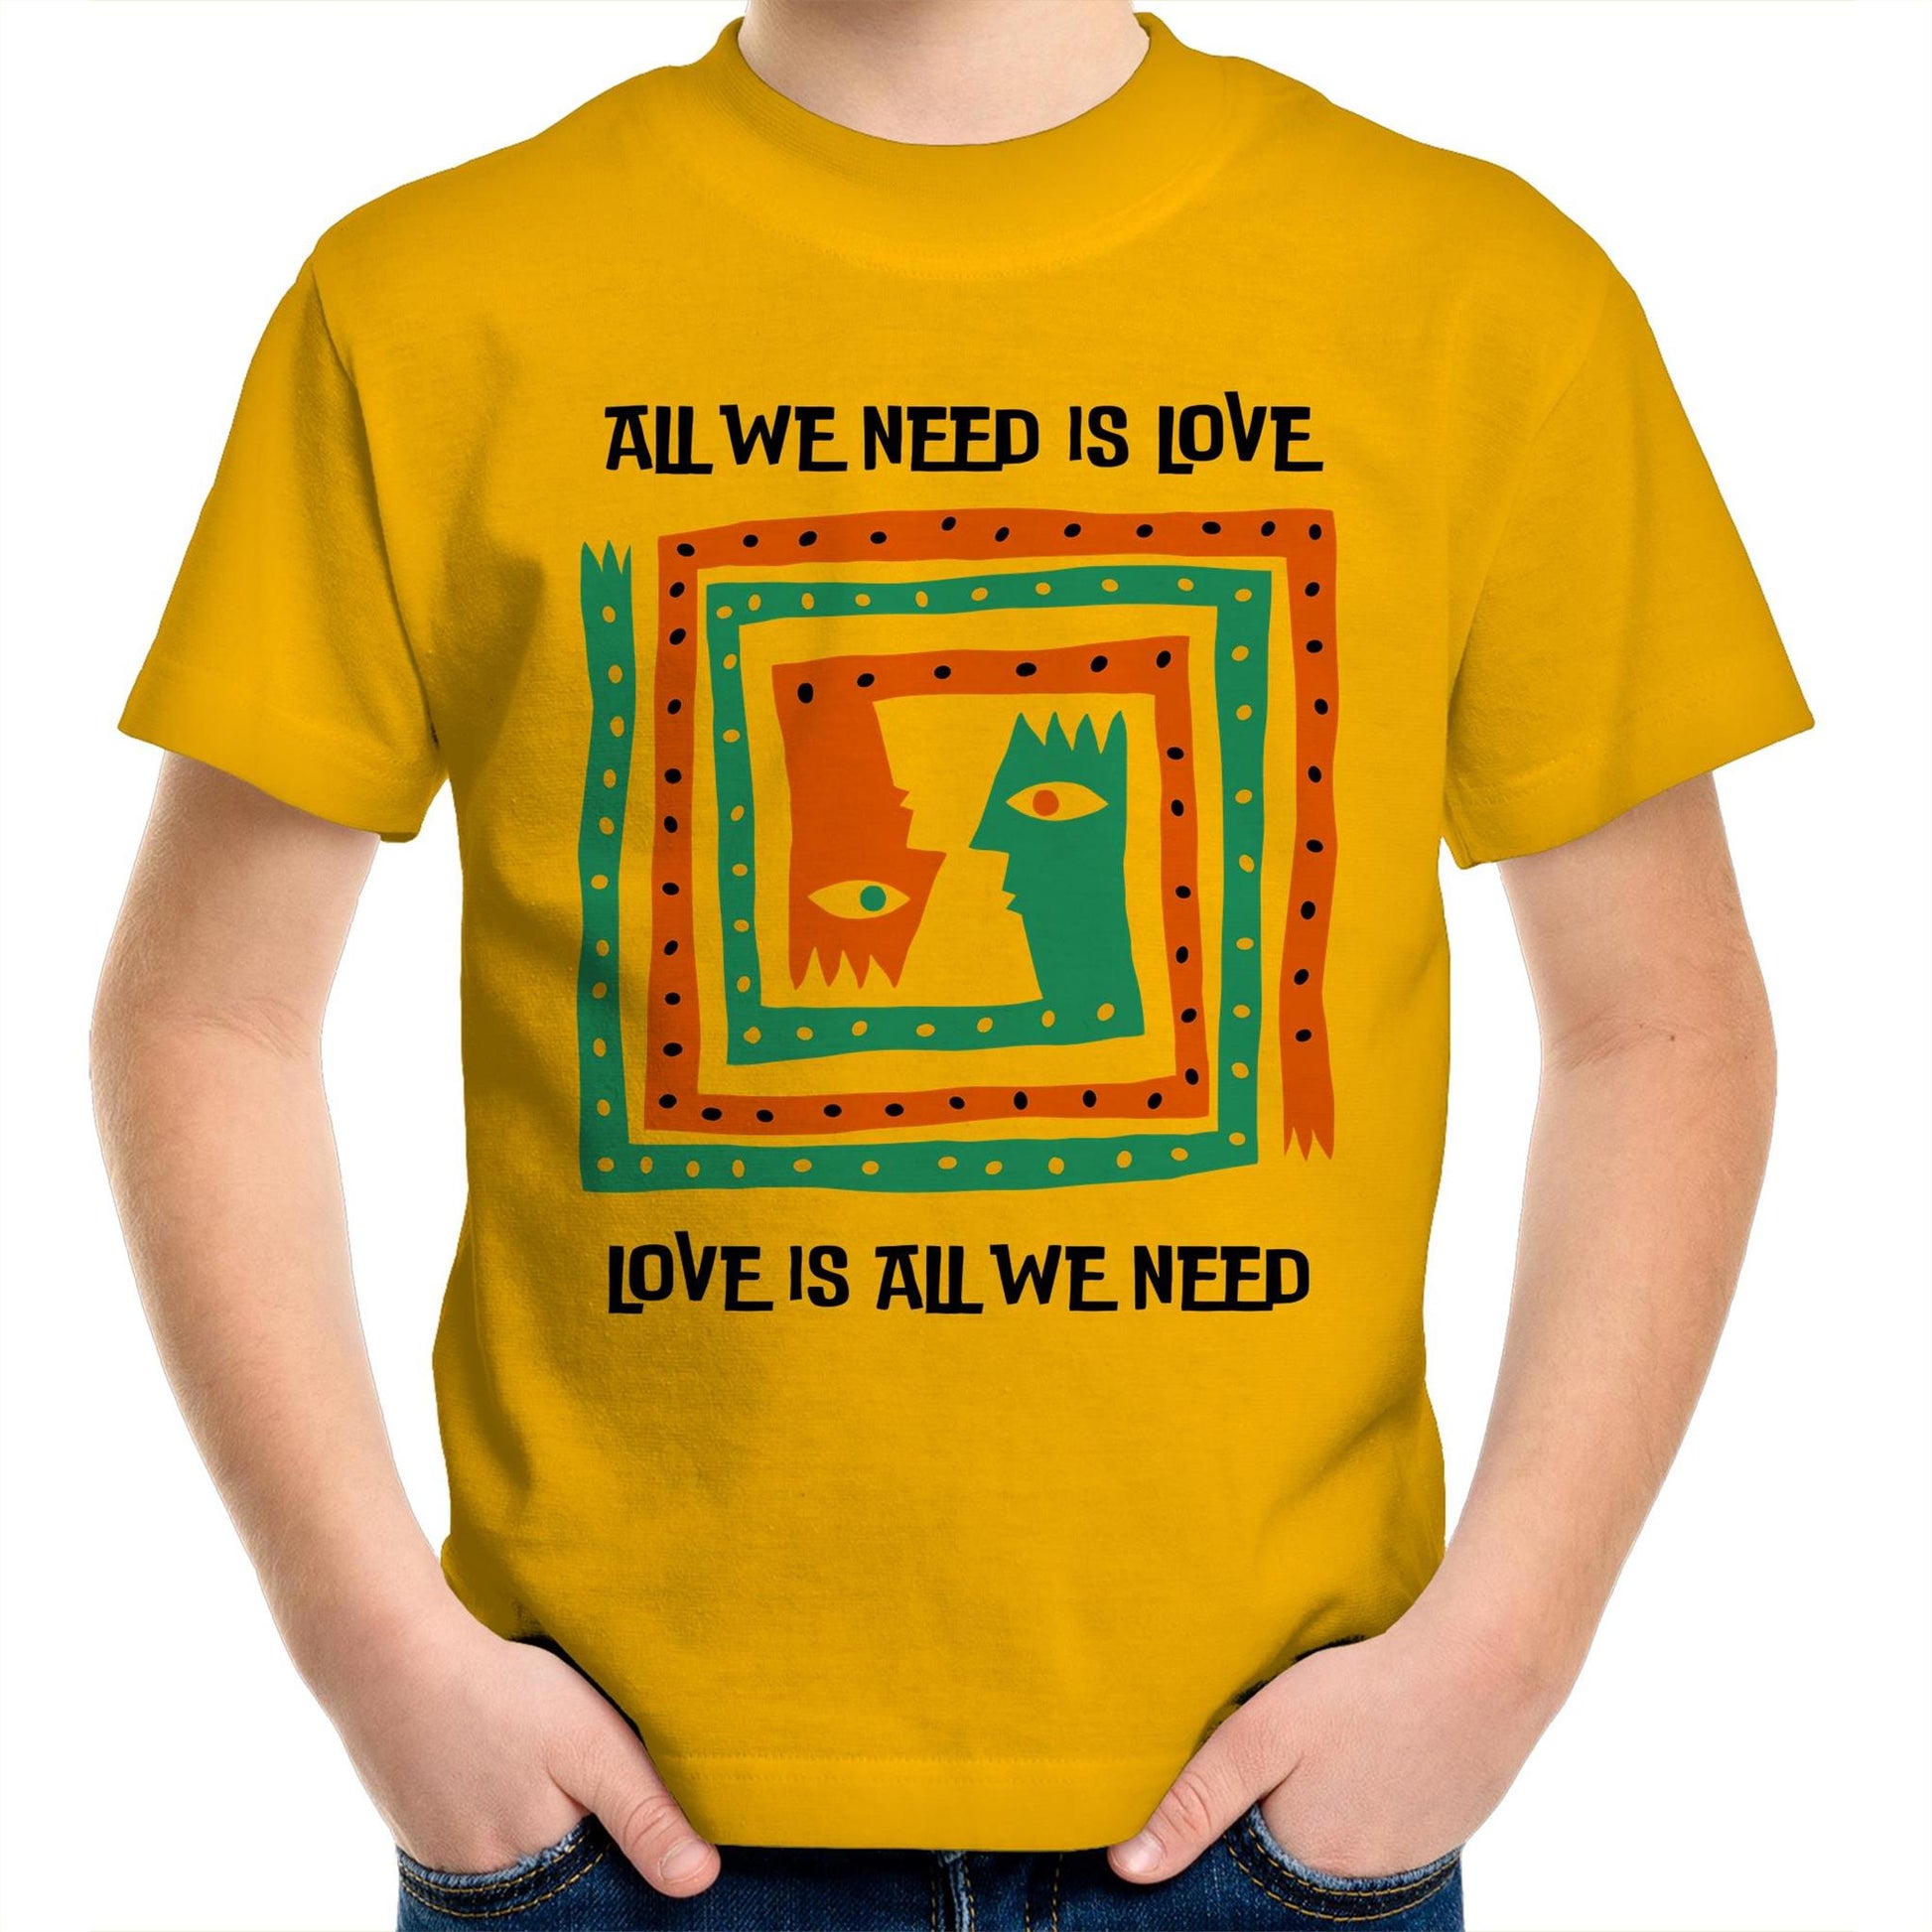 All We Need Is Love - Kids Youth T-Shirt Gold Kids Youth T-shirt